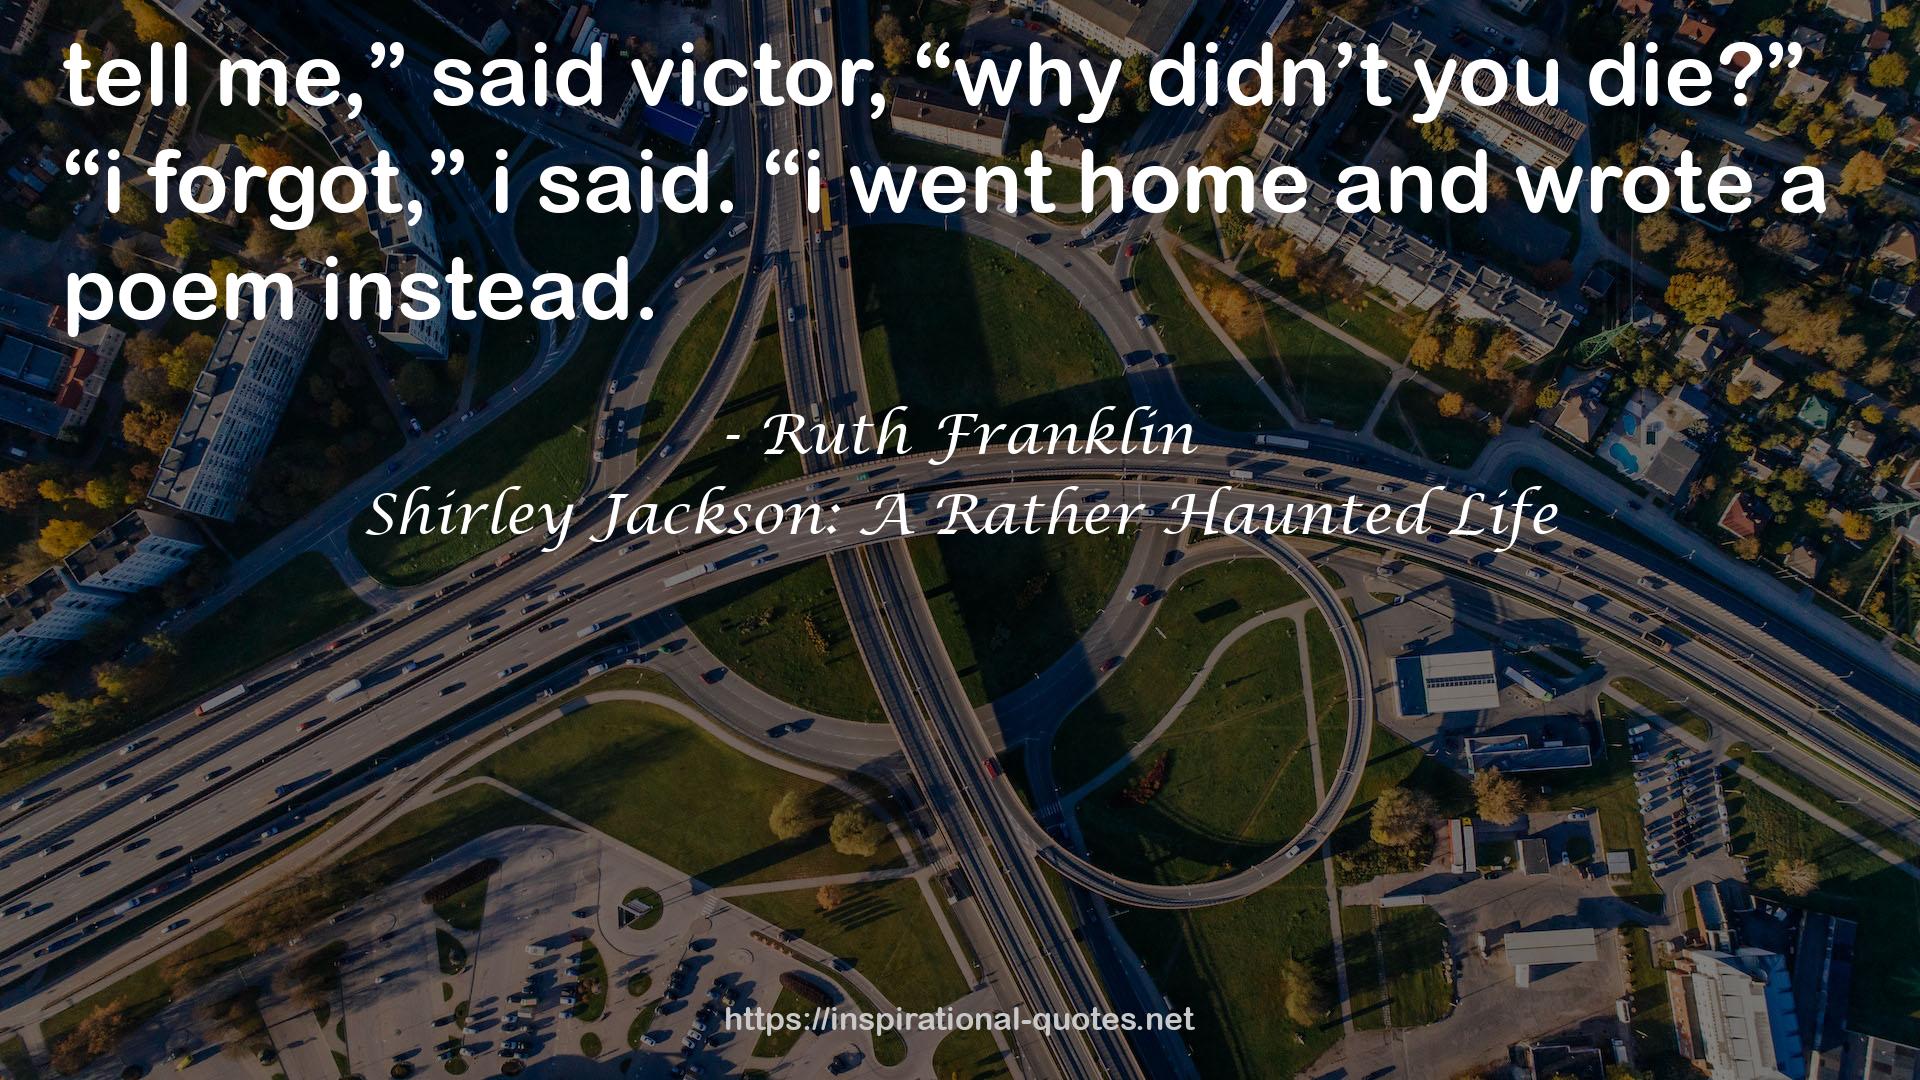 Ruth Franklin QUOTES